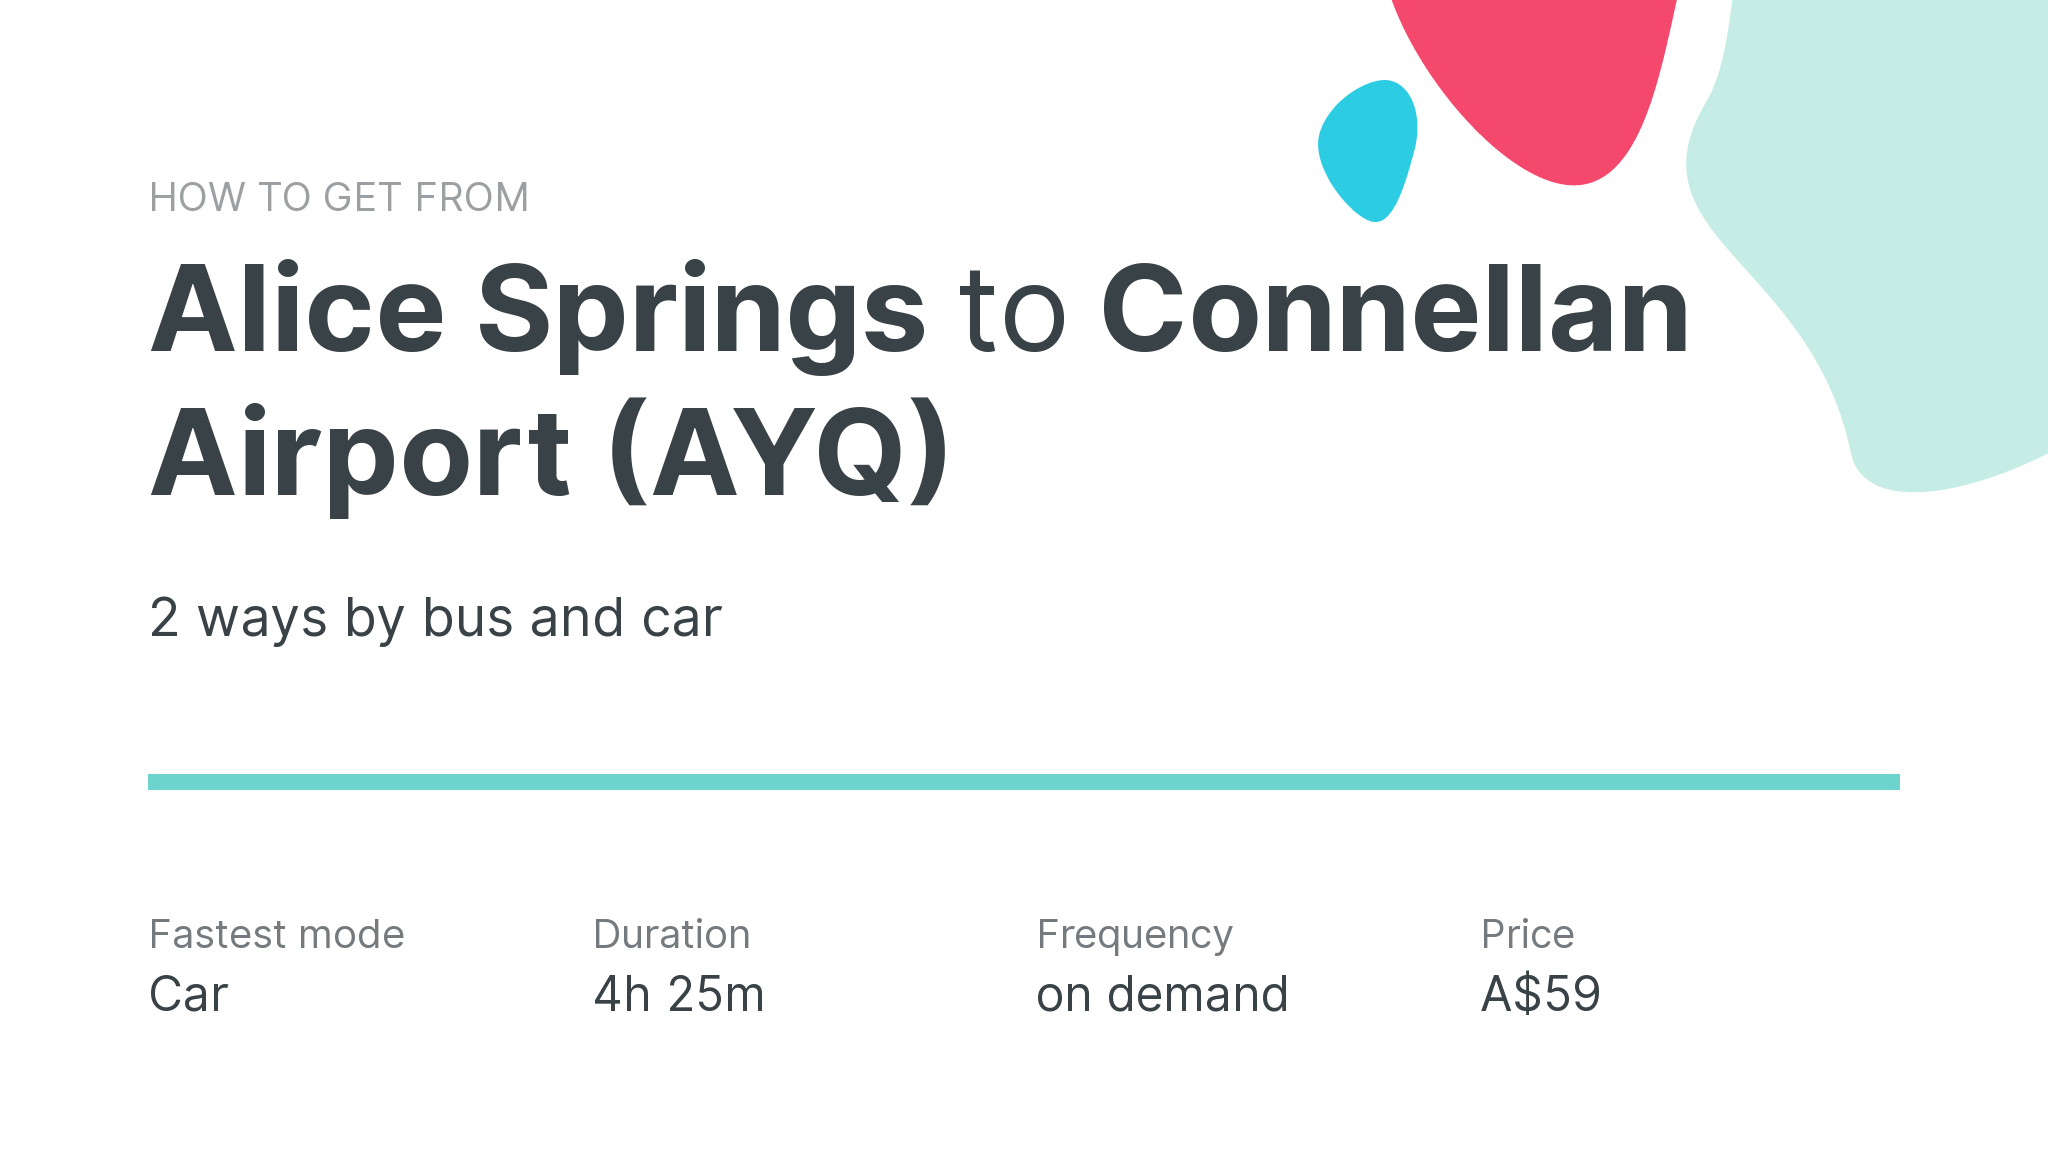 How do I get from Alice Springs to Connellan Airport (AYQ)